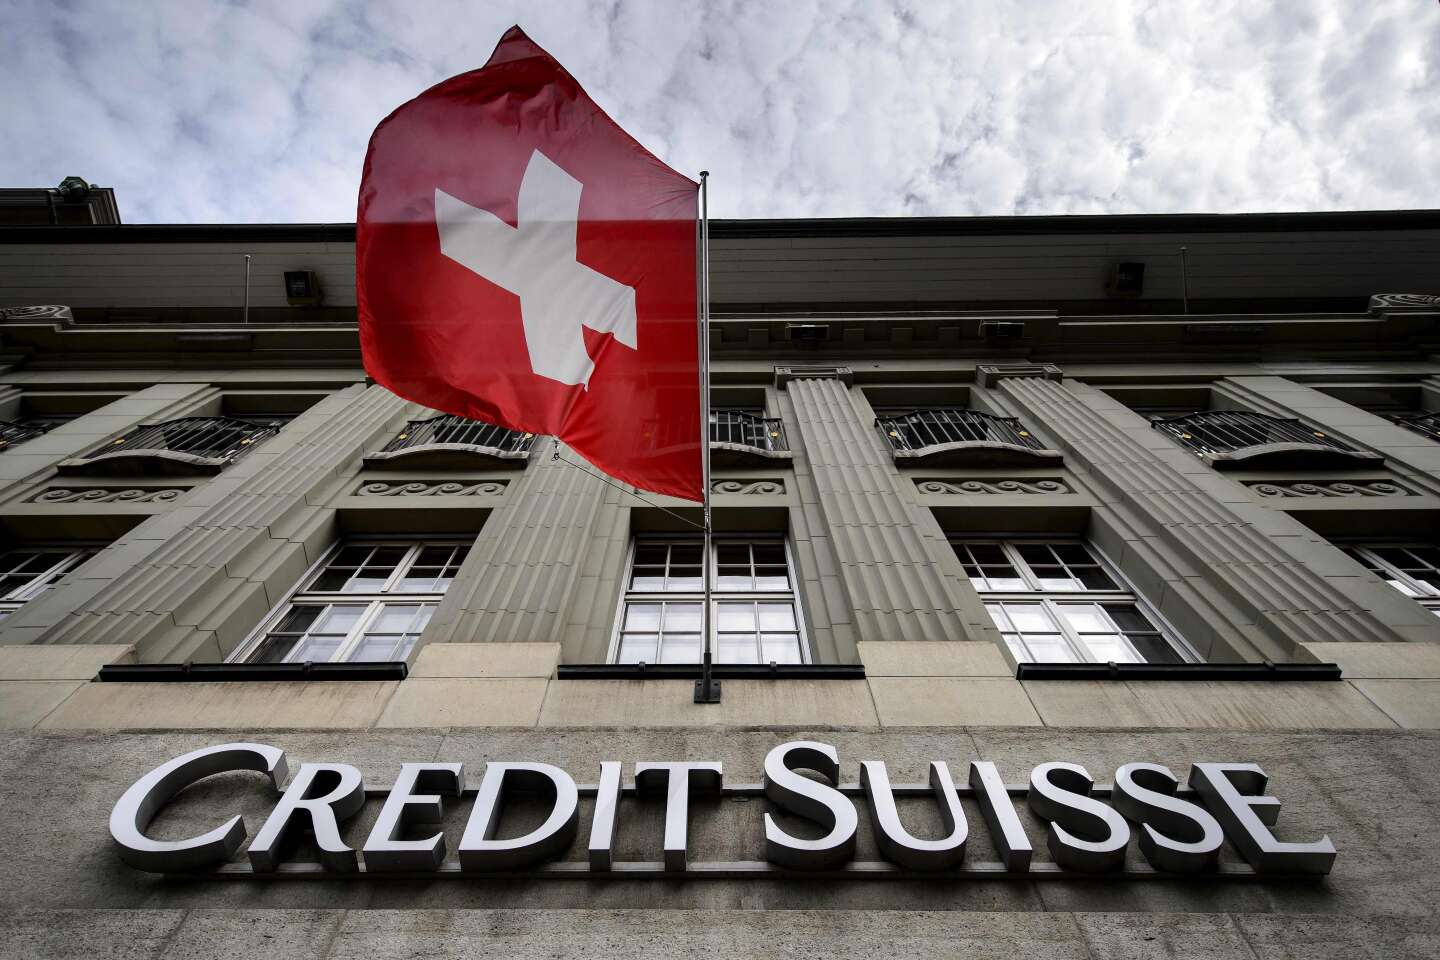 Credit Suisse shares fall, European banking stocks down sharply